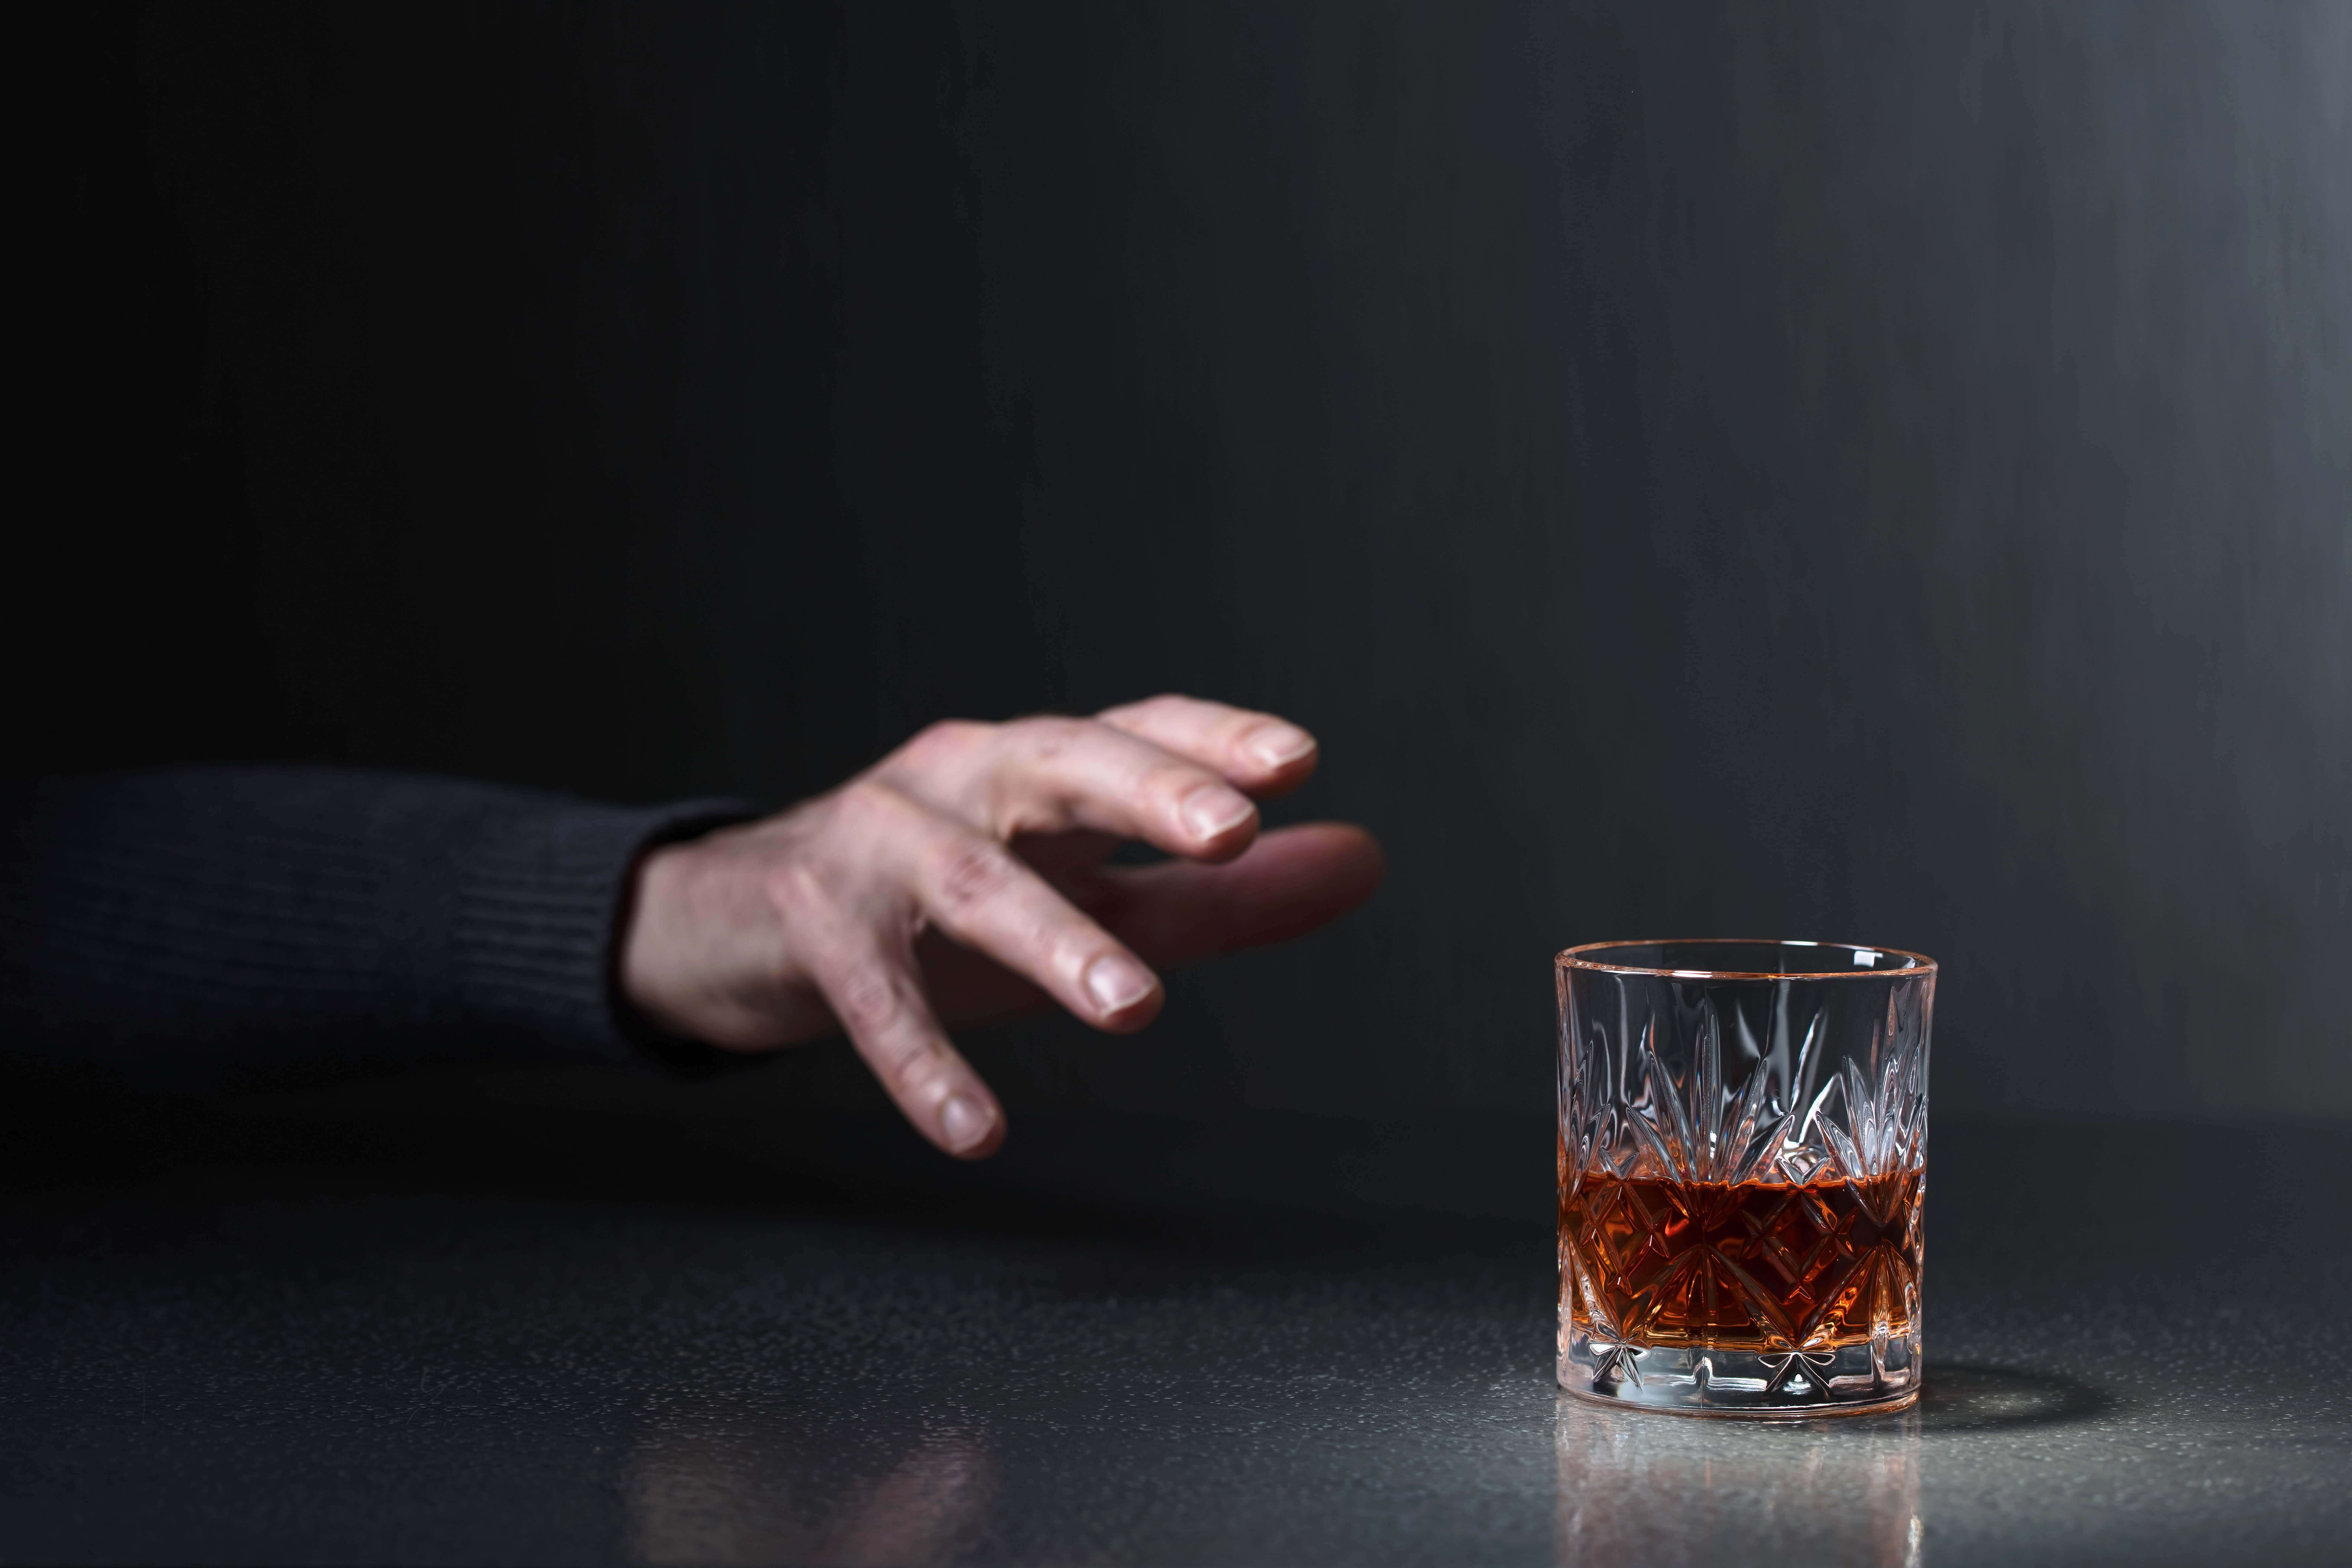 What Makes Alcohol Addictive?